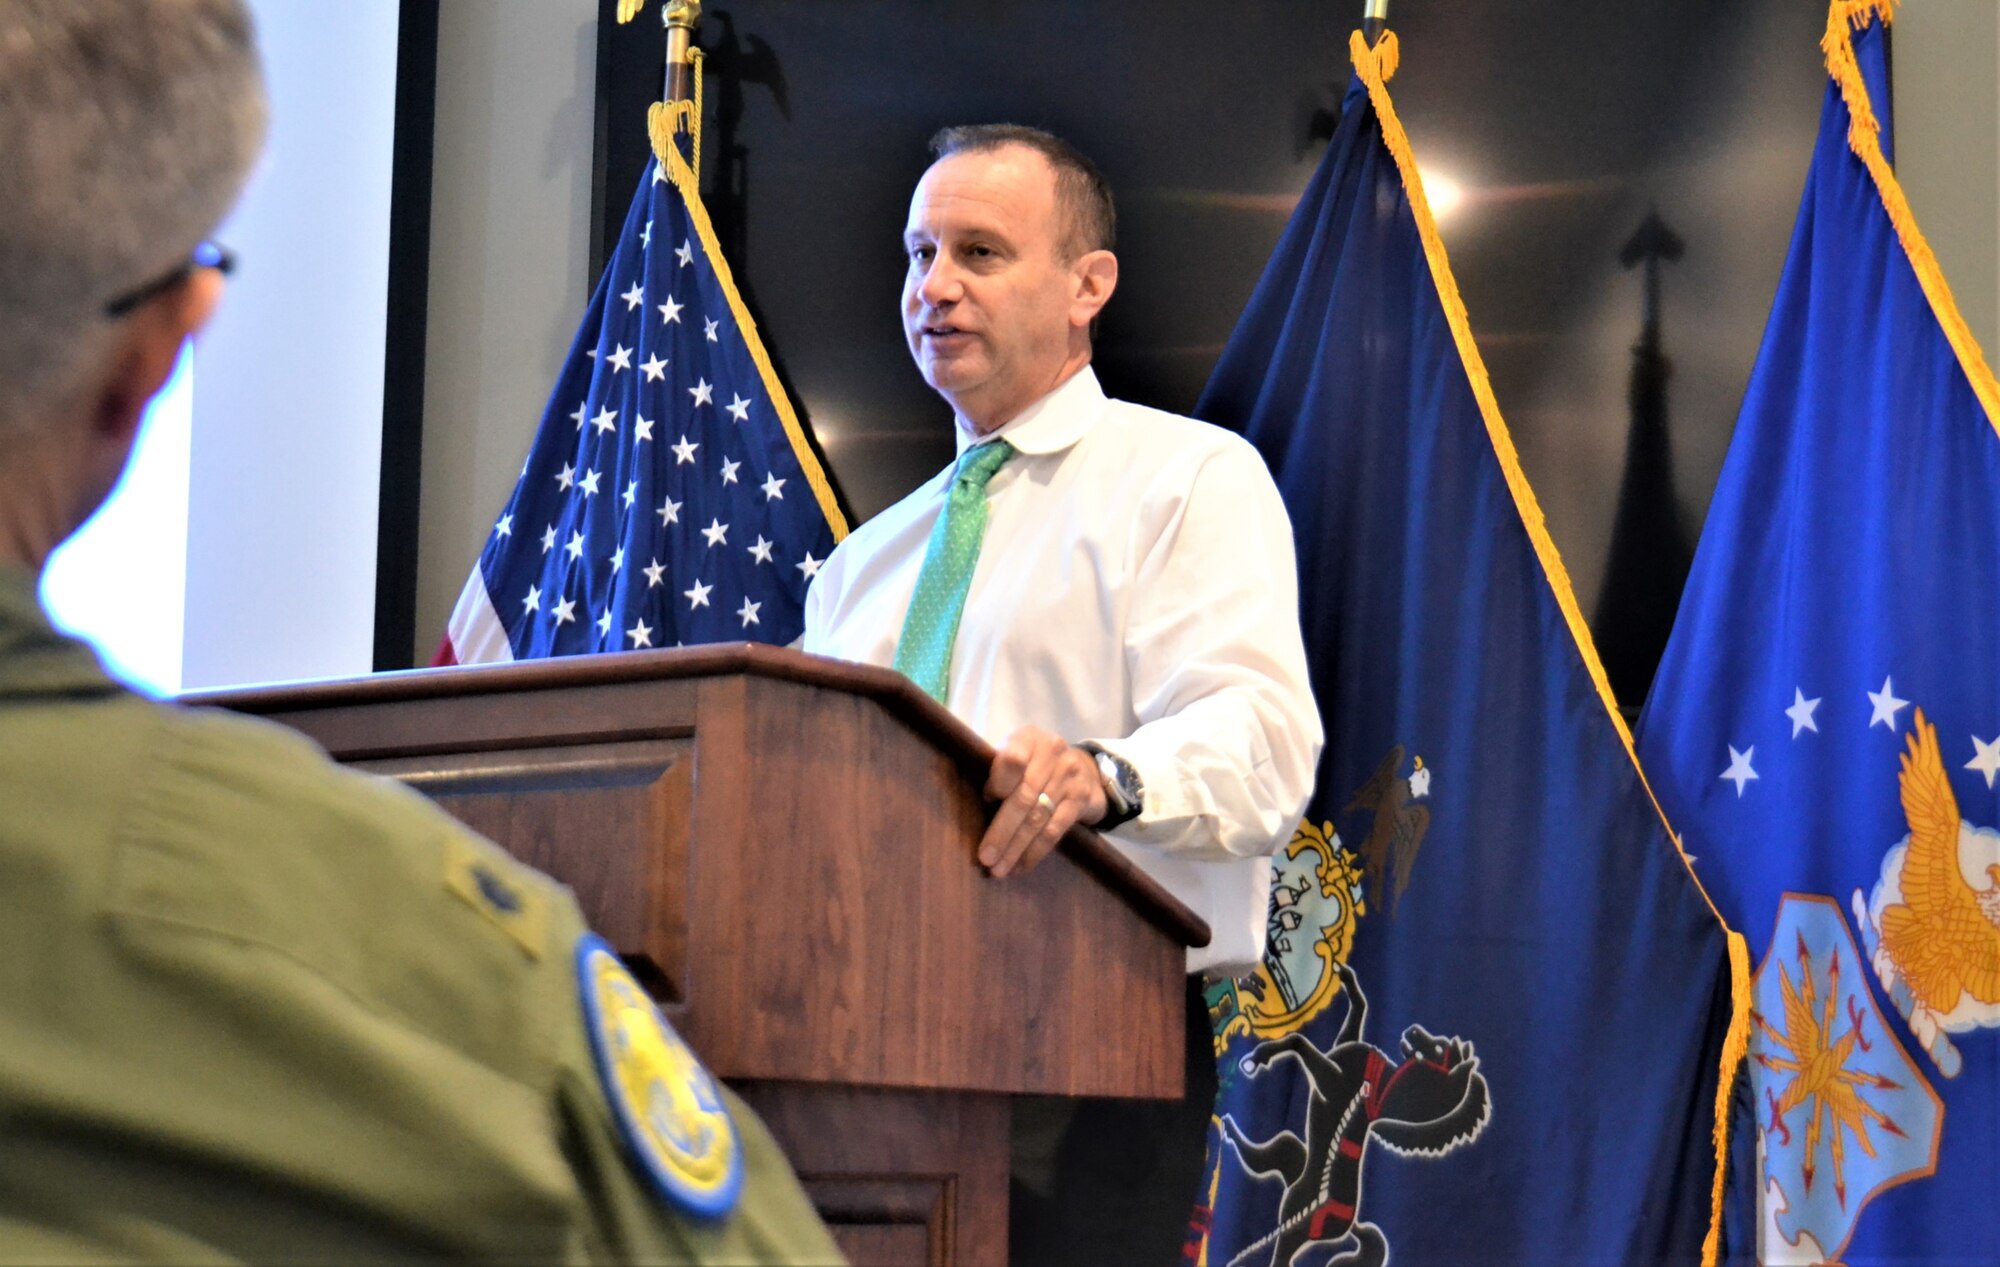 Dr. Richard E. Friedenheim, Abington Pulmonary and Critical Care Associates Sleep Disorder Center medical director, speaks about sleep disorders to an audience composed predominately of 111th Operations Group members, Dec. 12, 2017, Horsham Air Guard Station, Pa. Mission requirements of 111th OG members often result in operating on a shift-work schedule, which may potentially lead to sleep disorders. (U.S. Air National Guard photo by Tech. Sgt. Andria Allmond)